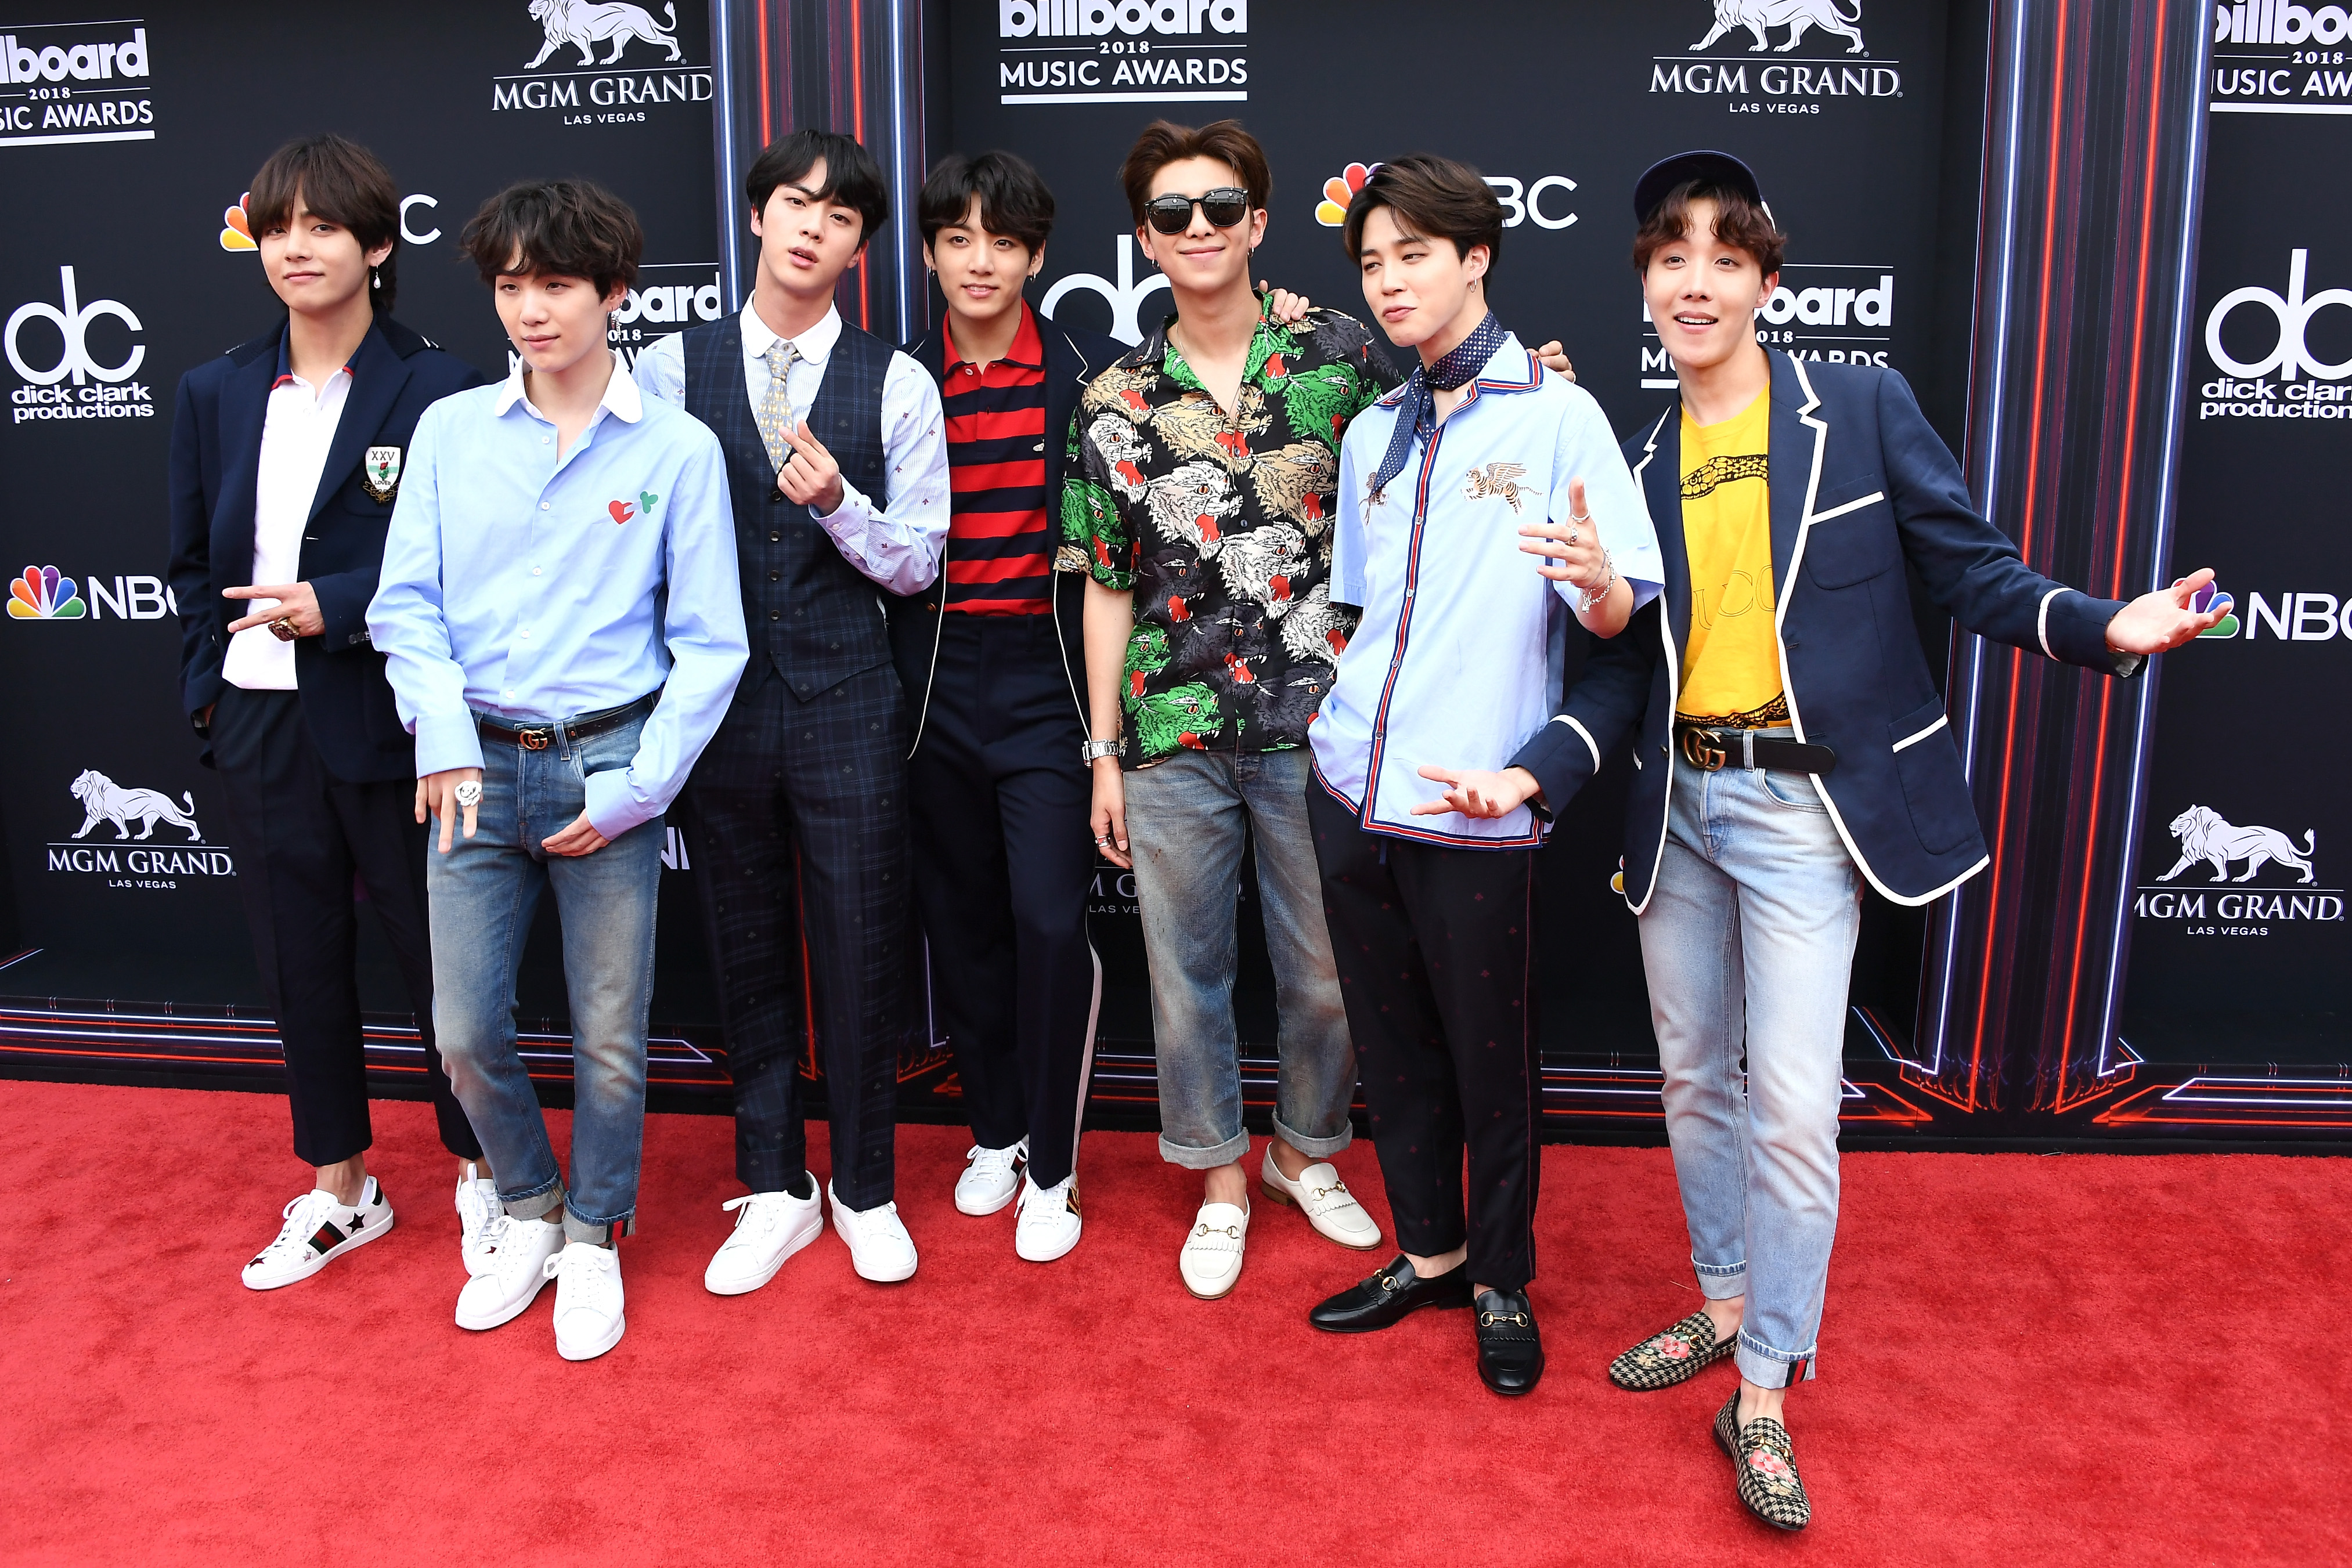 LAS VEGAS, NV - MAY 20:  Musical group BTS attends the 2018 Billboard Music Awards at MGM Grand Garden Arena on May 20, 2018 in Las Vegas, Nevada.  (Photo by Steve Granitz/WireImage)